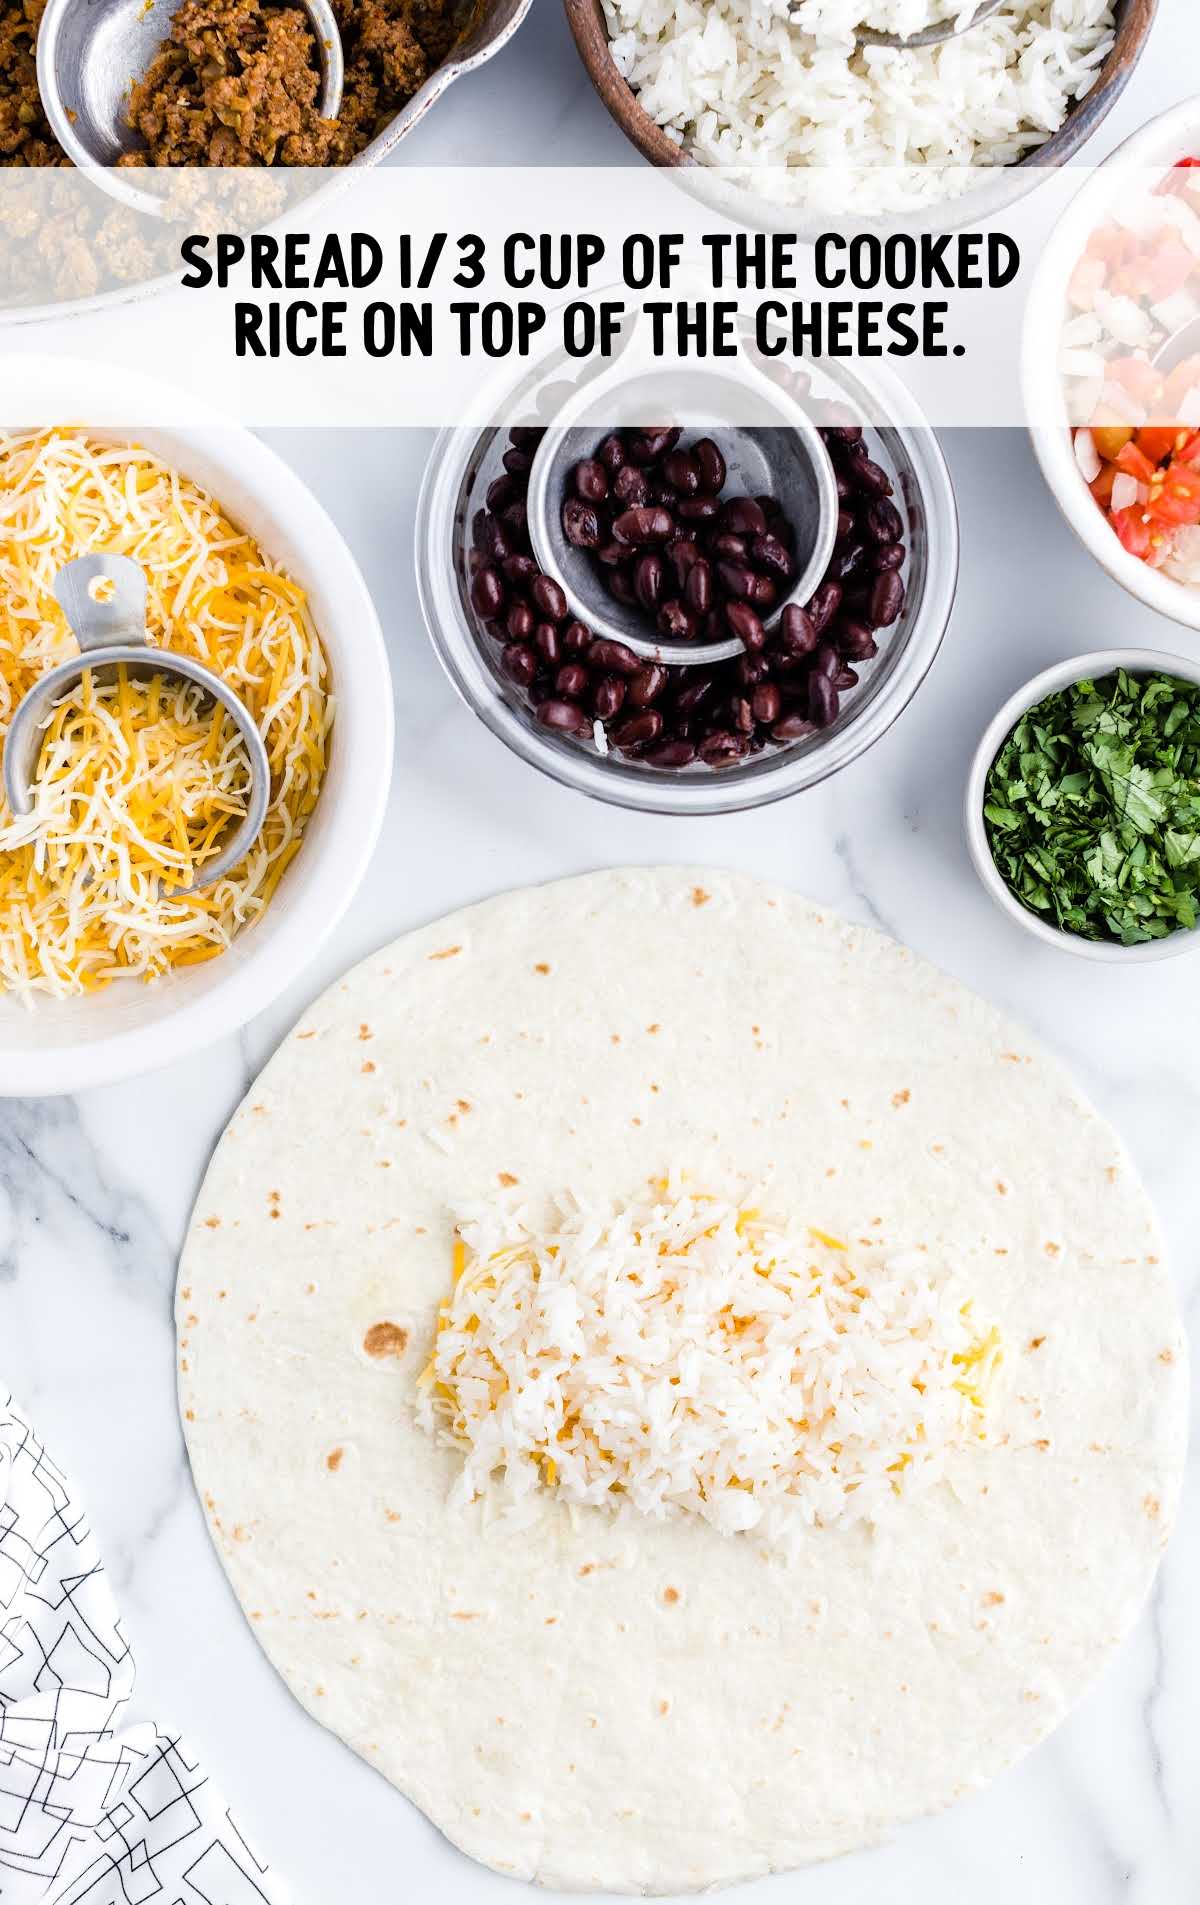 white rice being placed on top of the shredded cheese on the tortilla